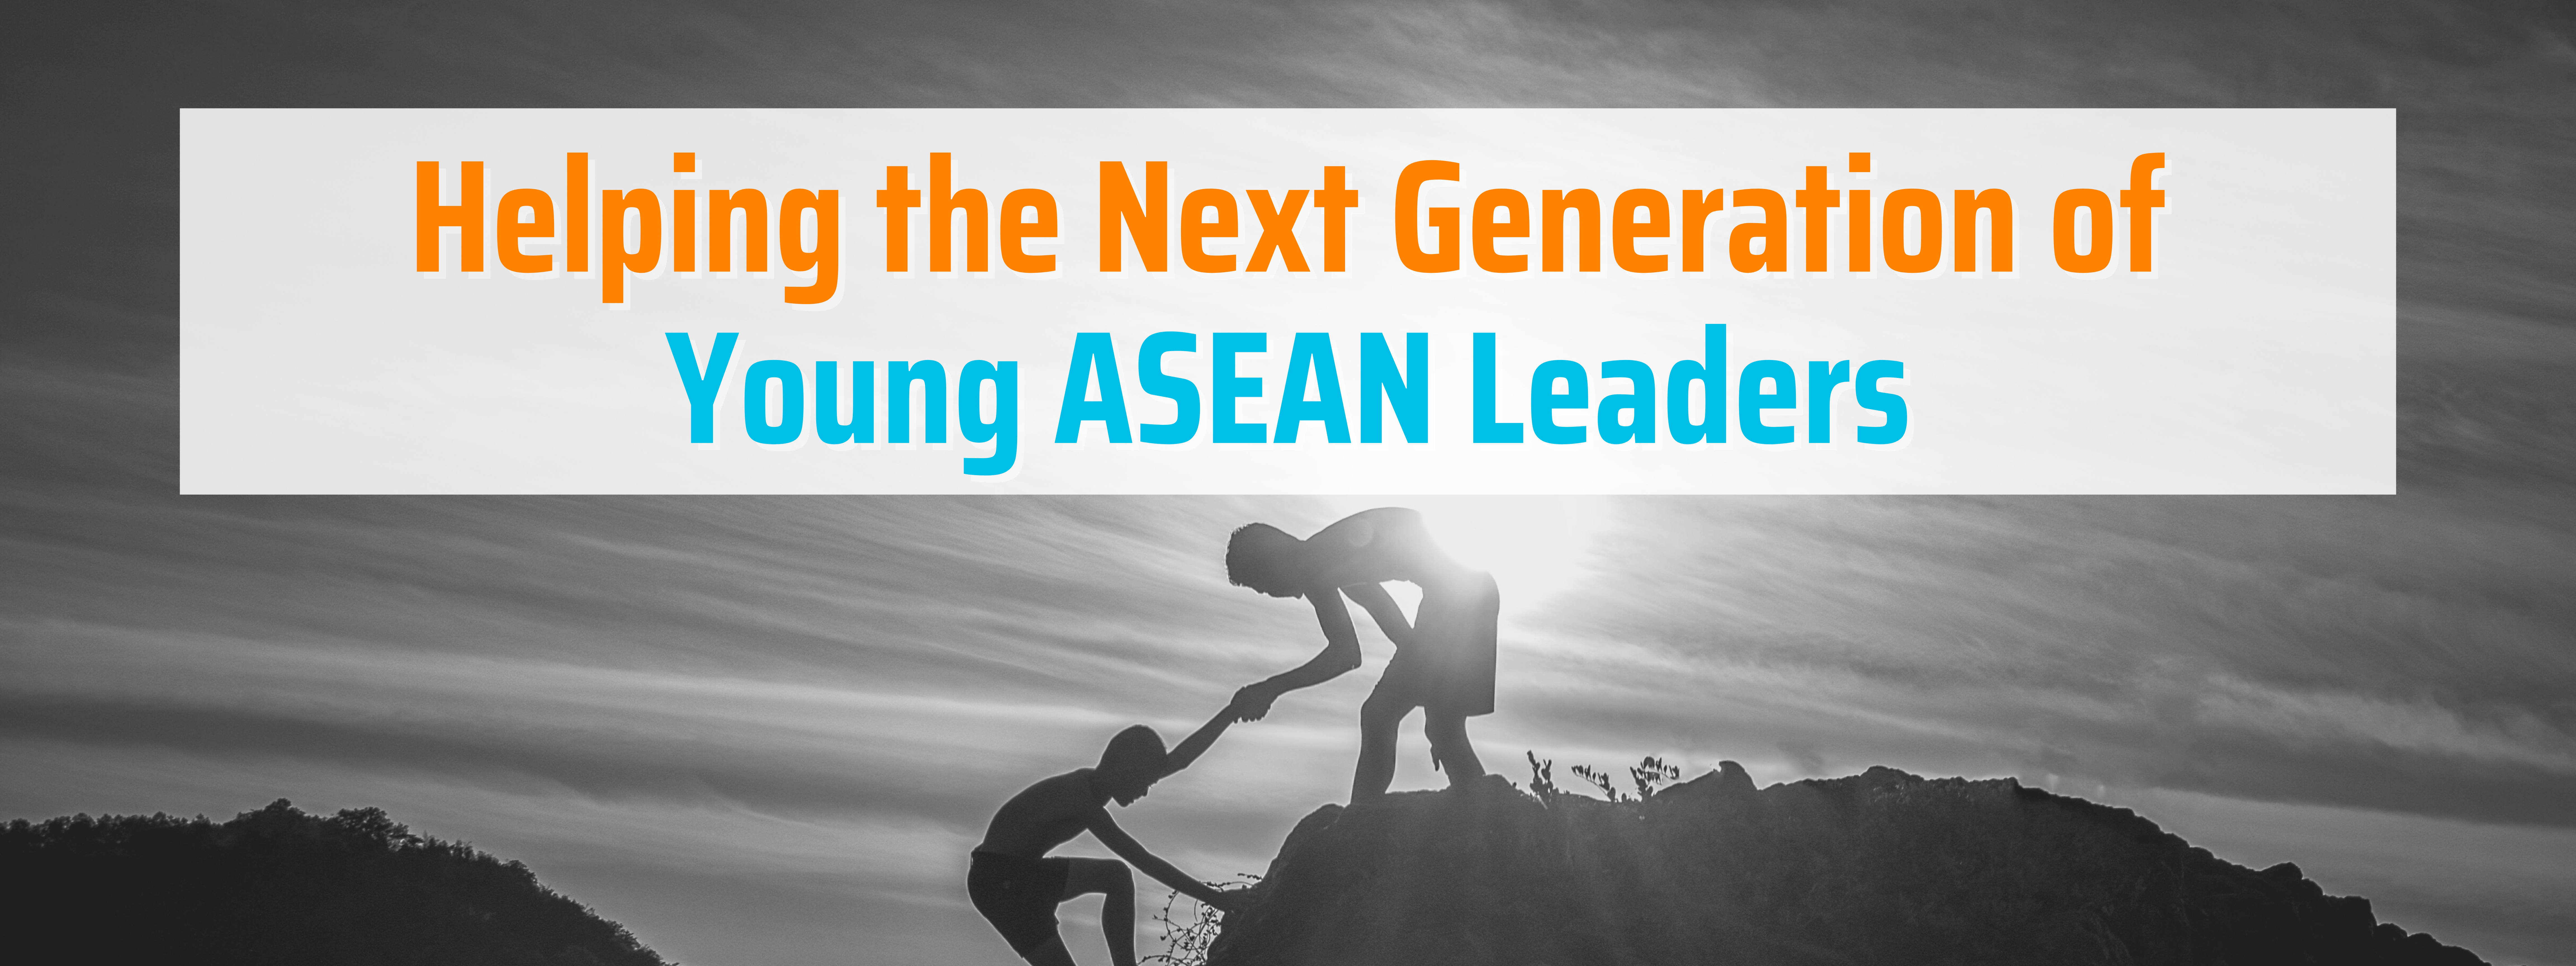 How TechSoup Asia-Pacific is Helping the Next Generation of Young ASEAN Leaders